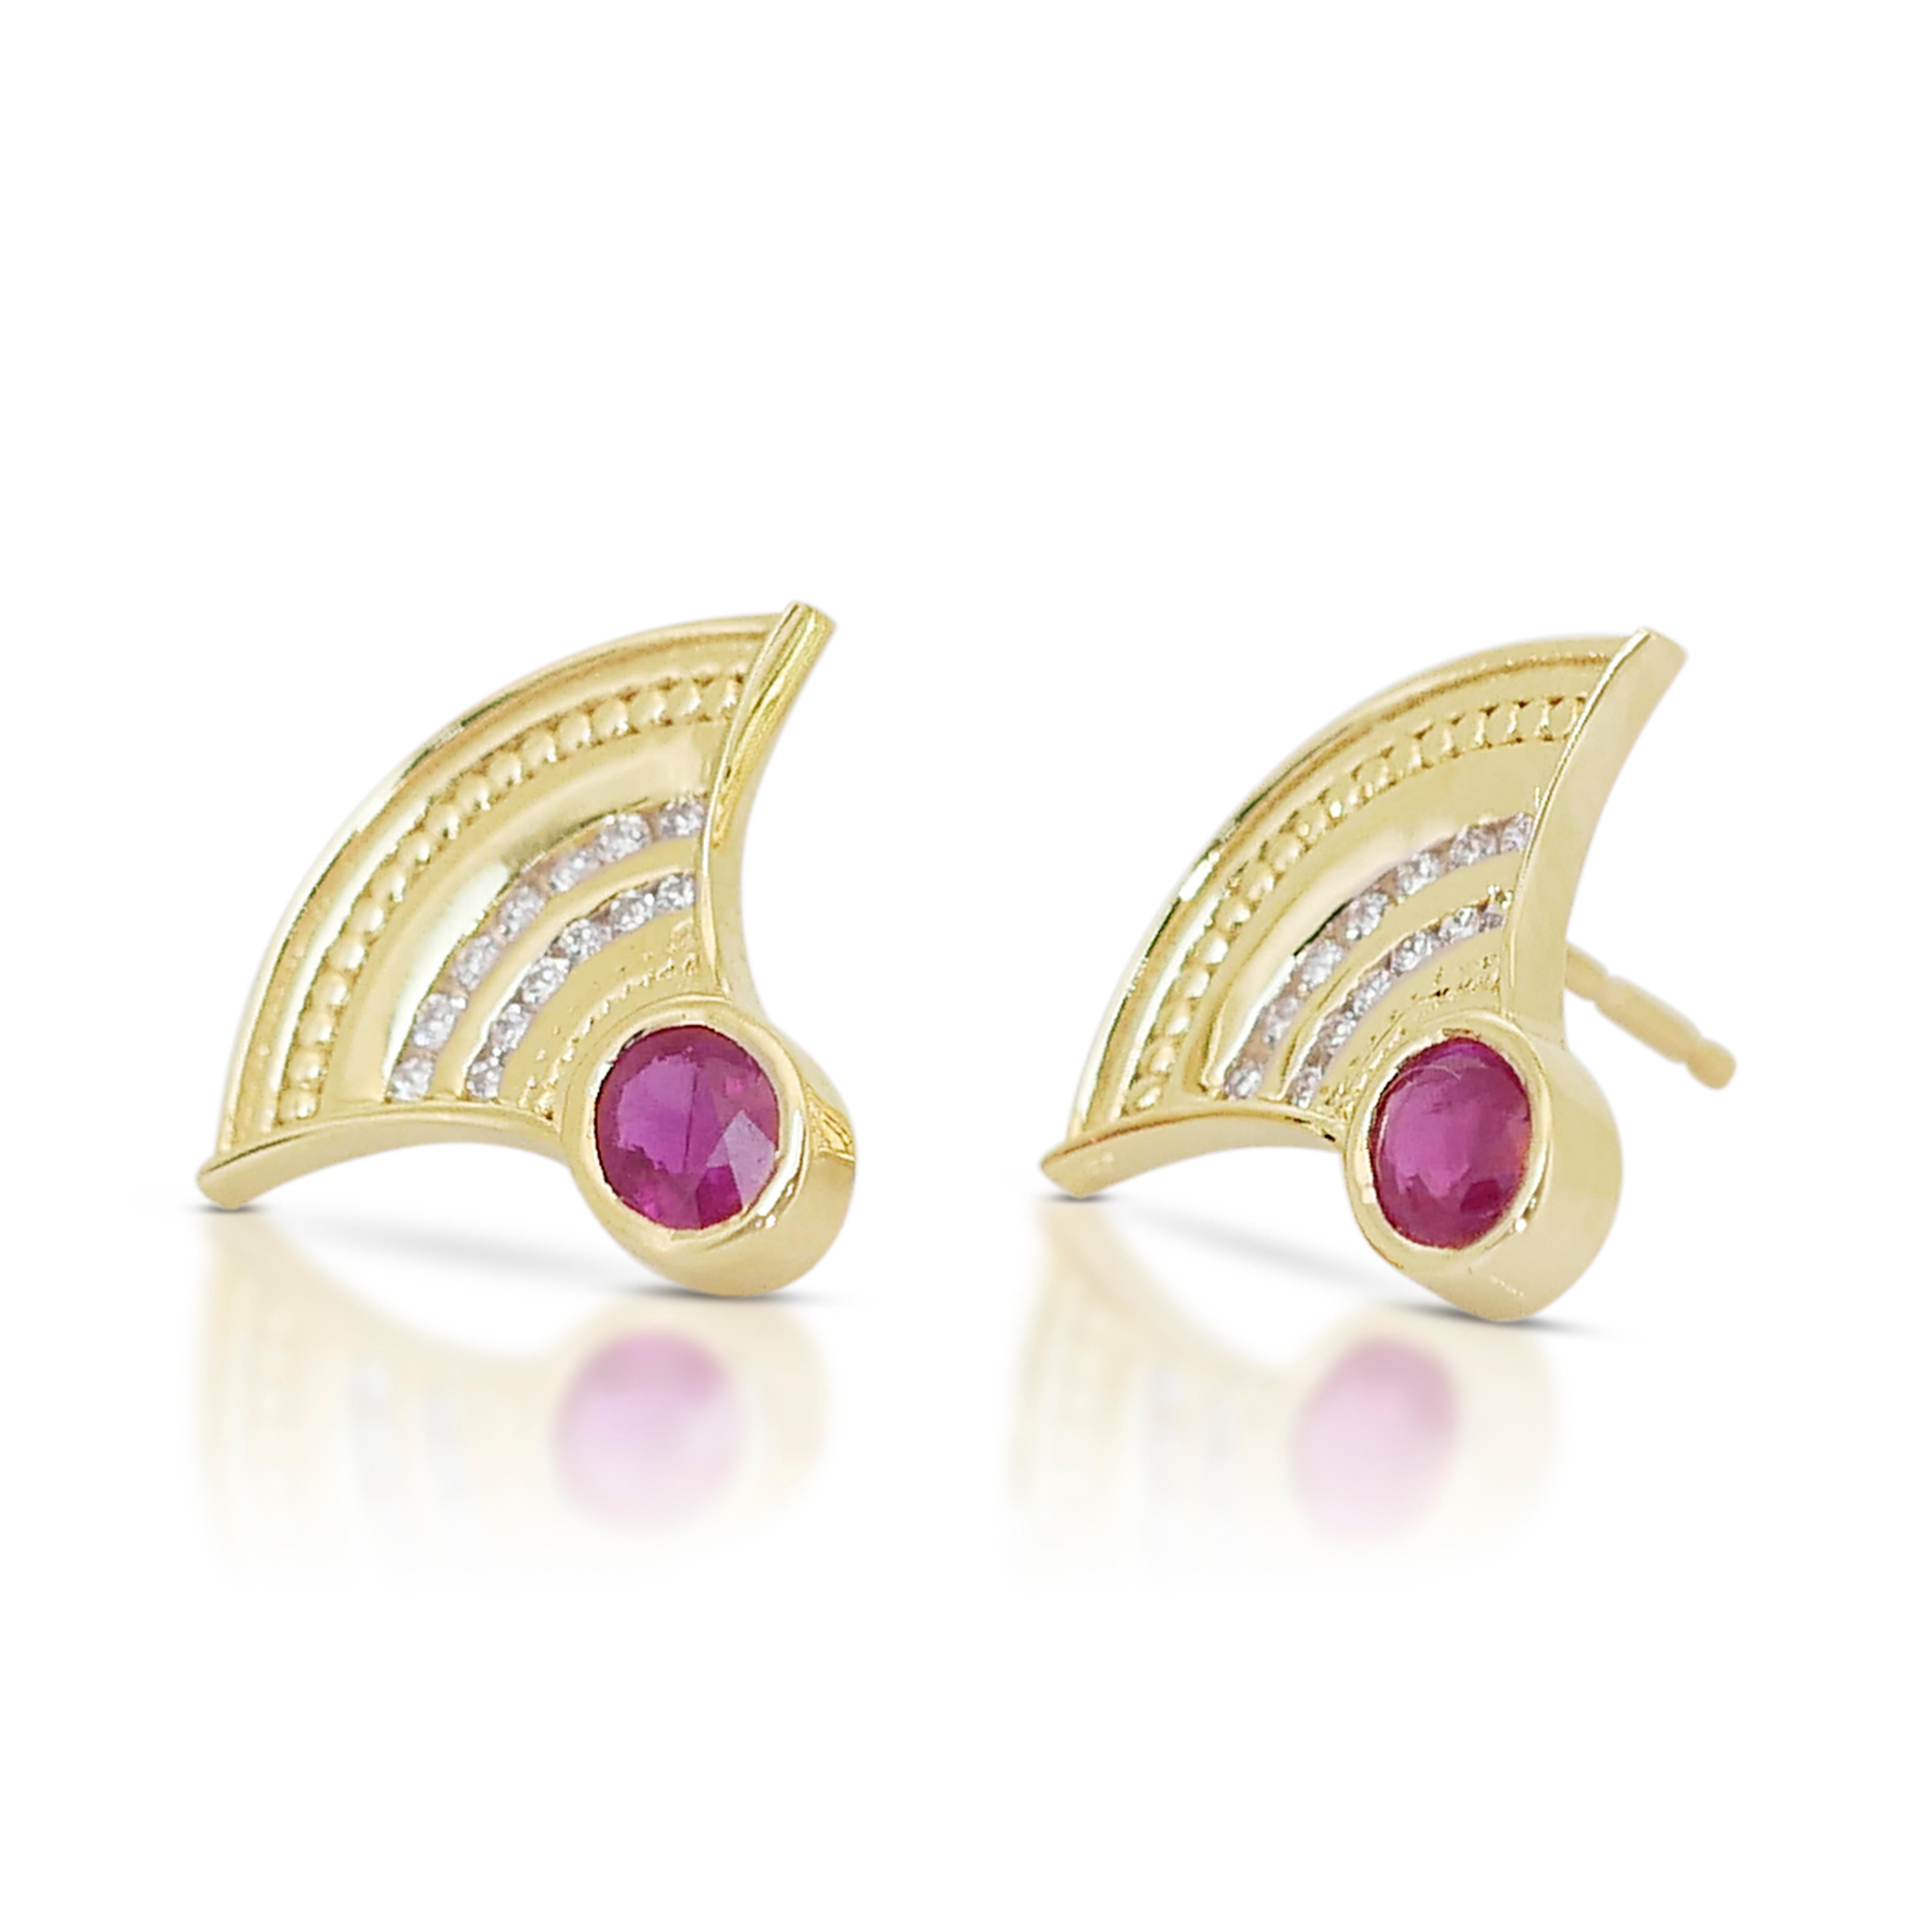 Stunning 0.75ct Rubies and Diamonds Stud Earrings in 14k Yellow Gold - AIG Certified

Discover the elegance of these 14k yellow gold earrings featuring two exquisite oval-shaped rubies, totaling 0.60 carats. The rich red color of the rubies,